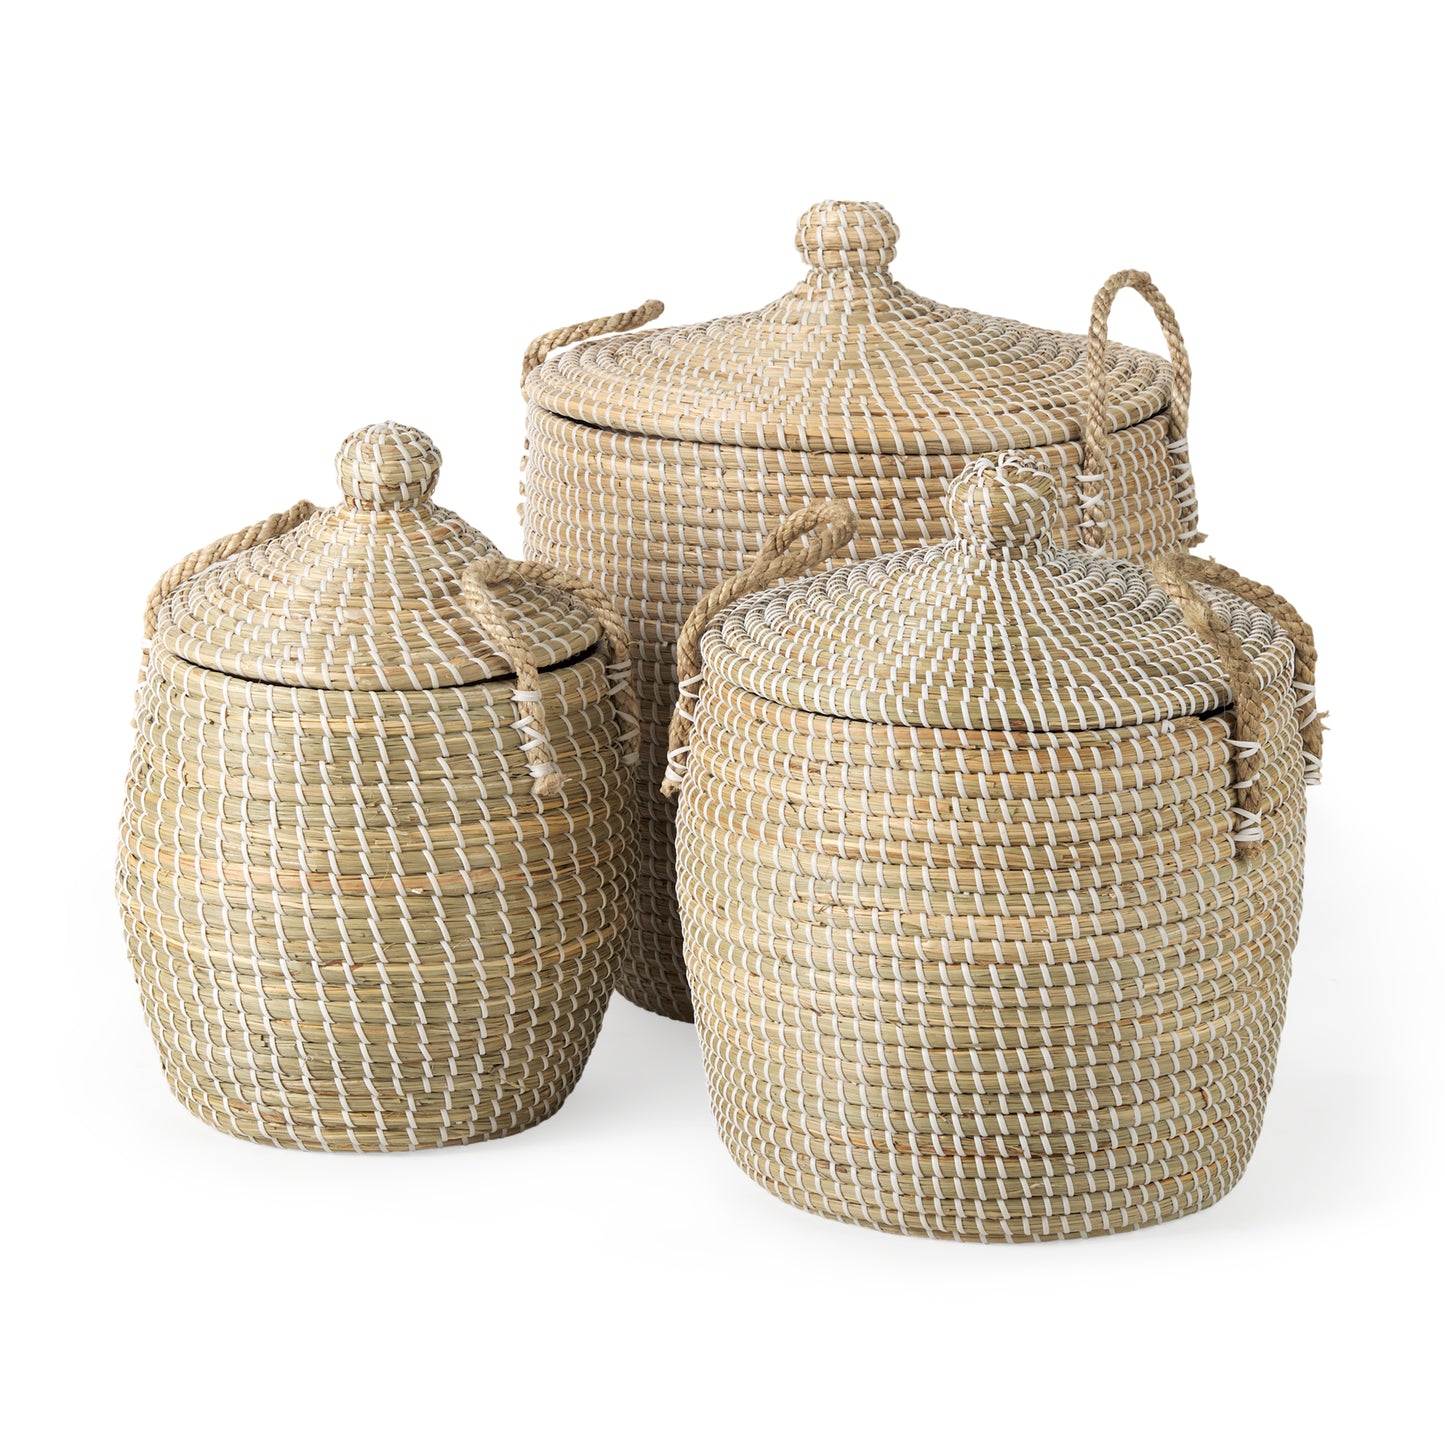 Olivia Beige Seagrass Basket W/Lid and Handles - Small